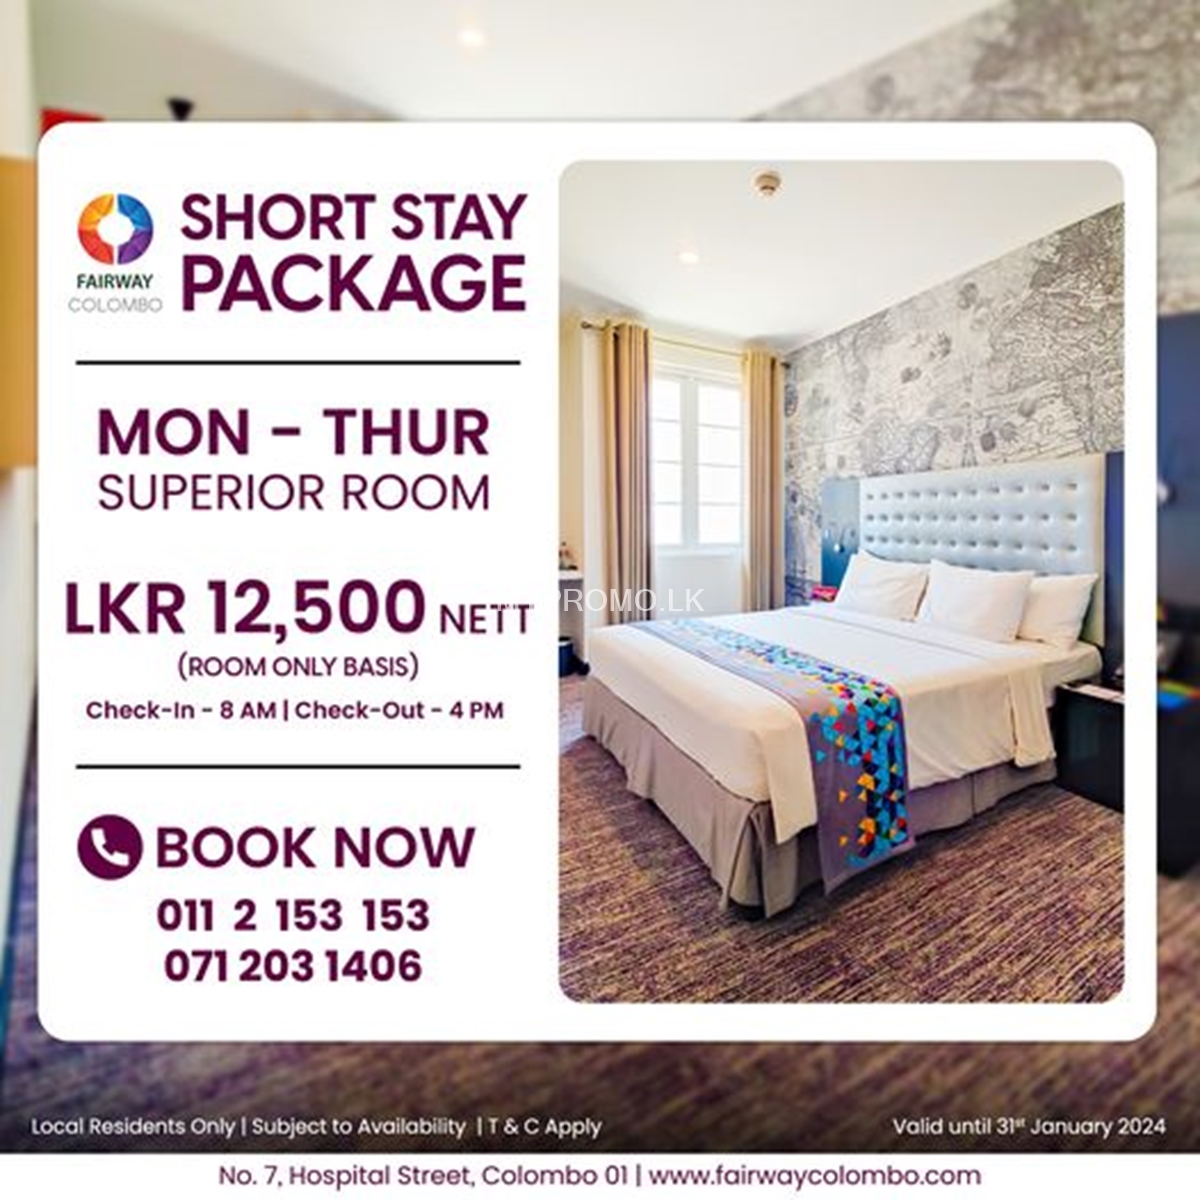 Short stay package at Fairway Colombo